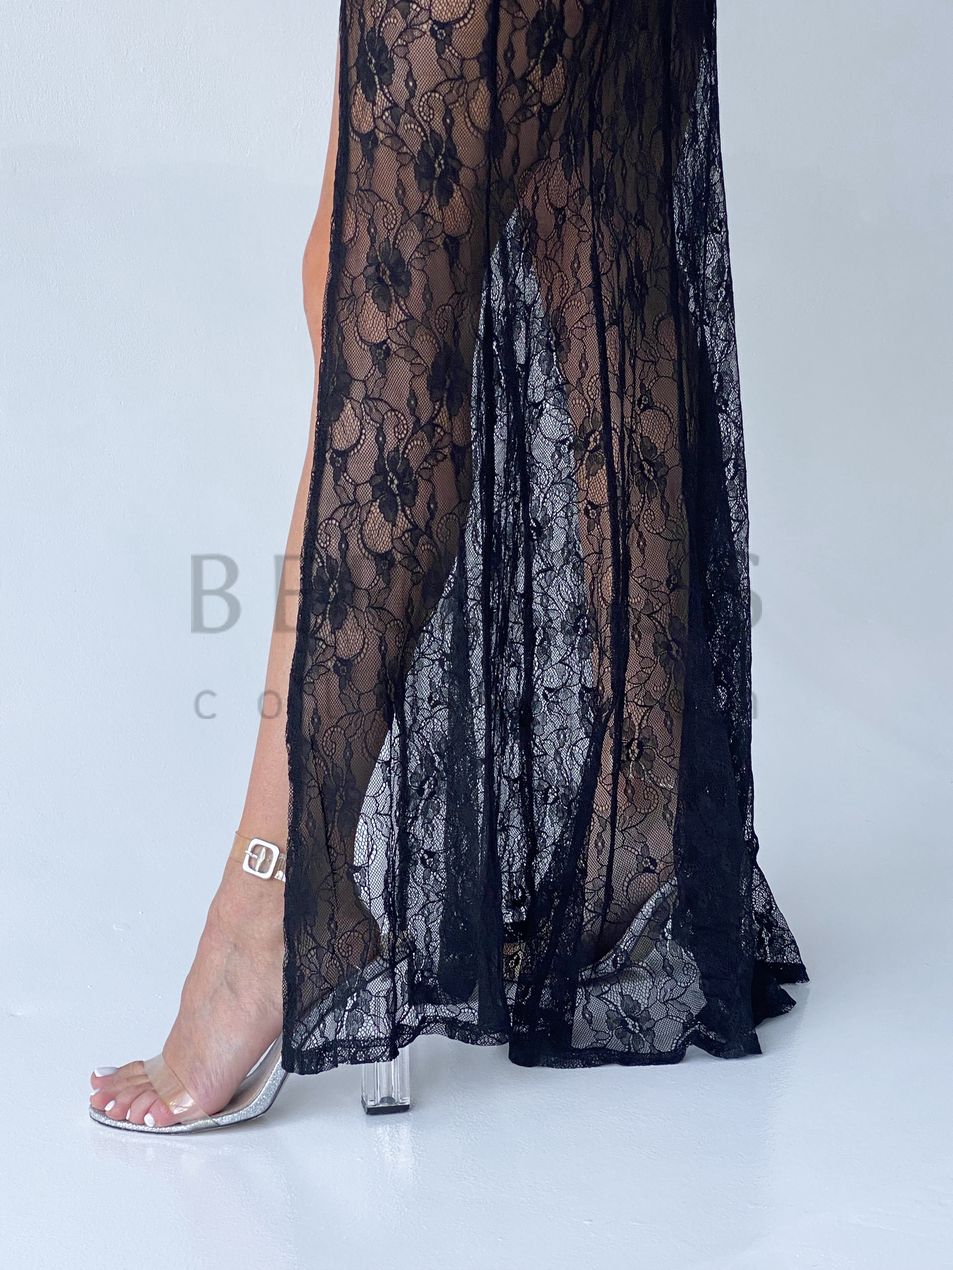 SKIRT, collection LACE, guipure Black, L